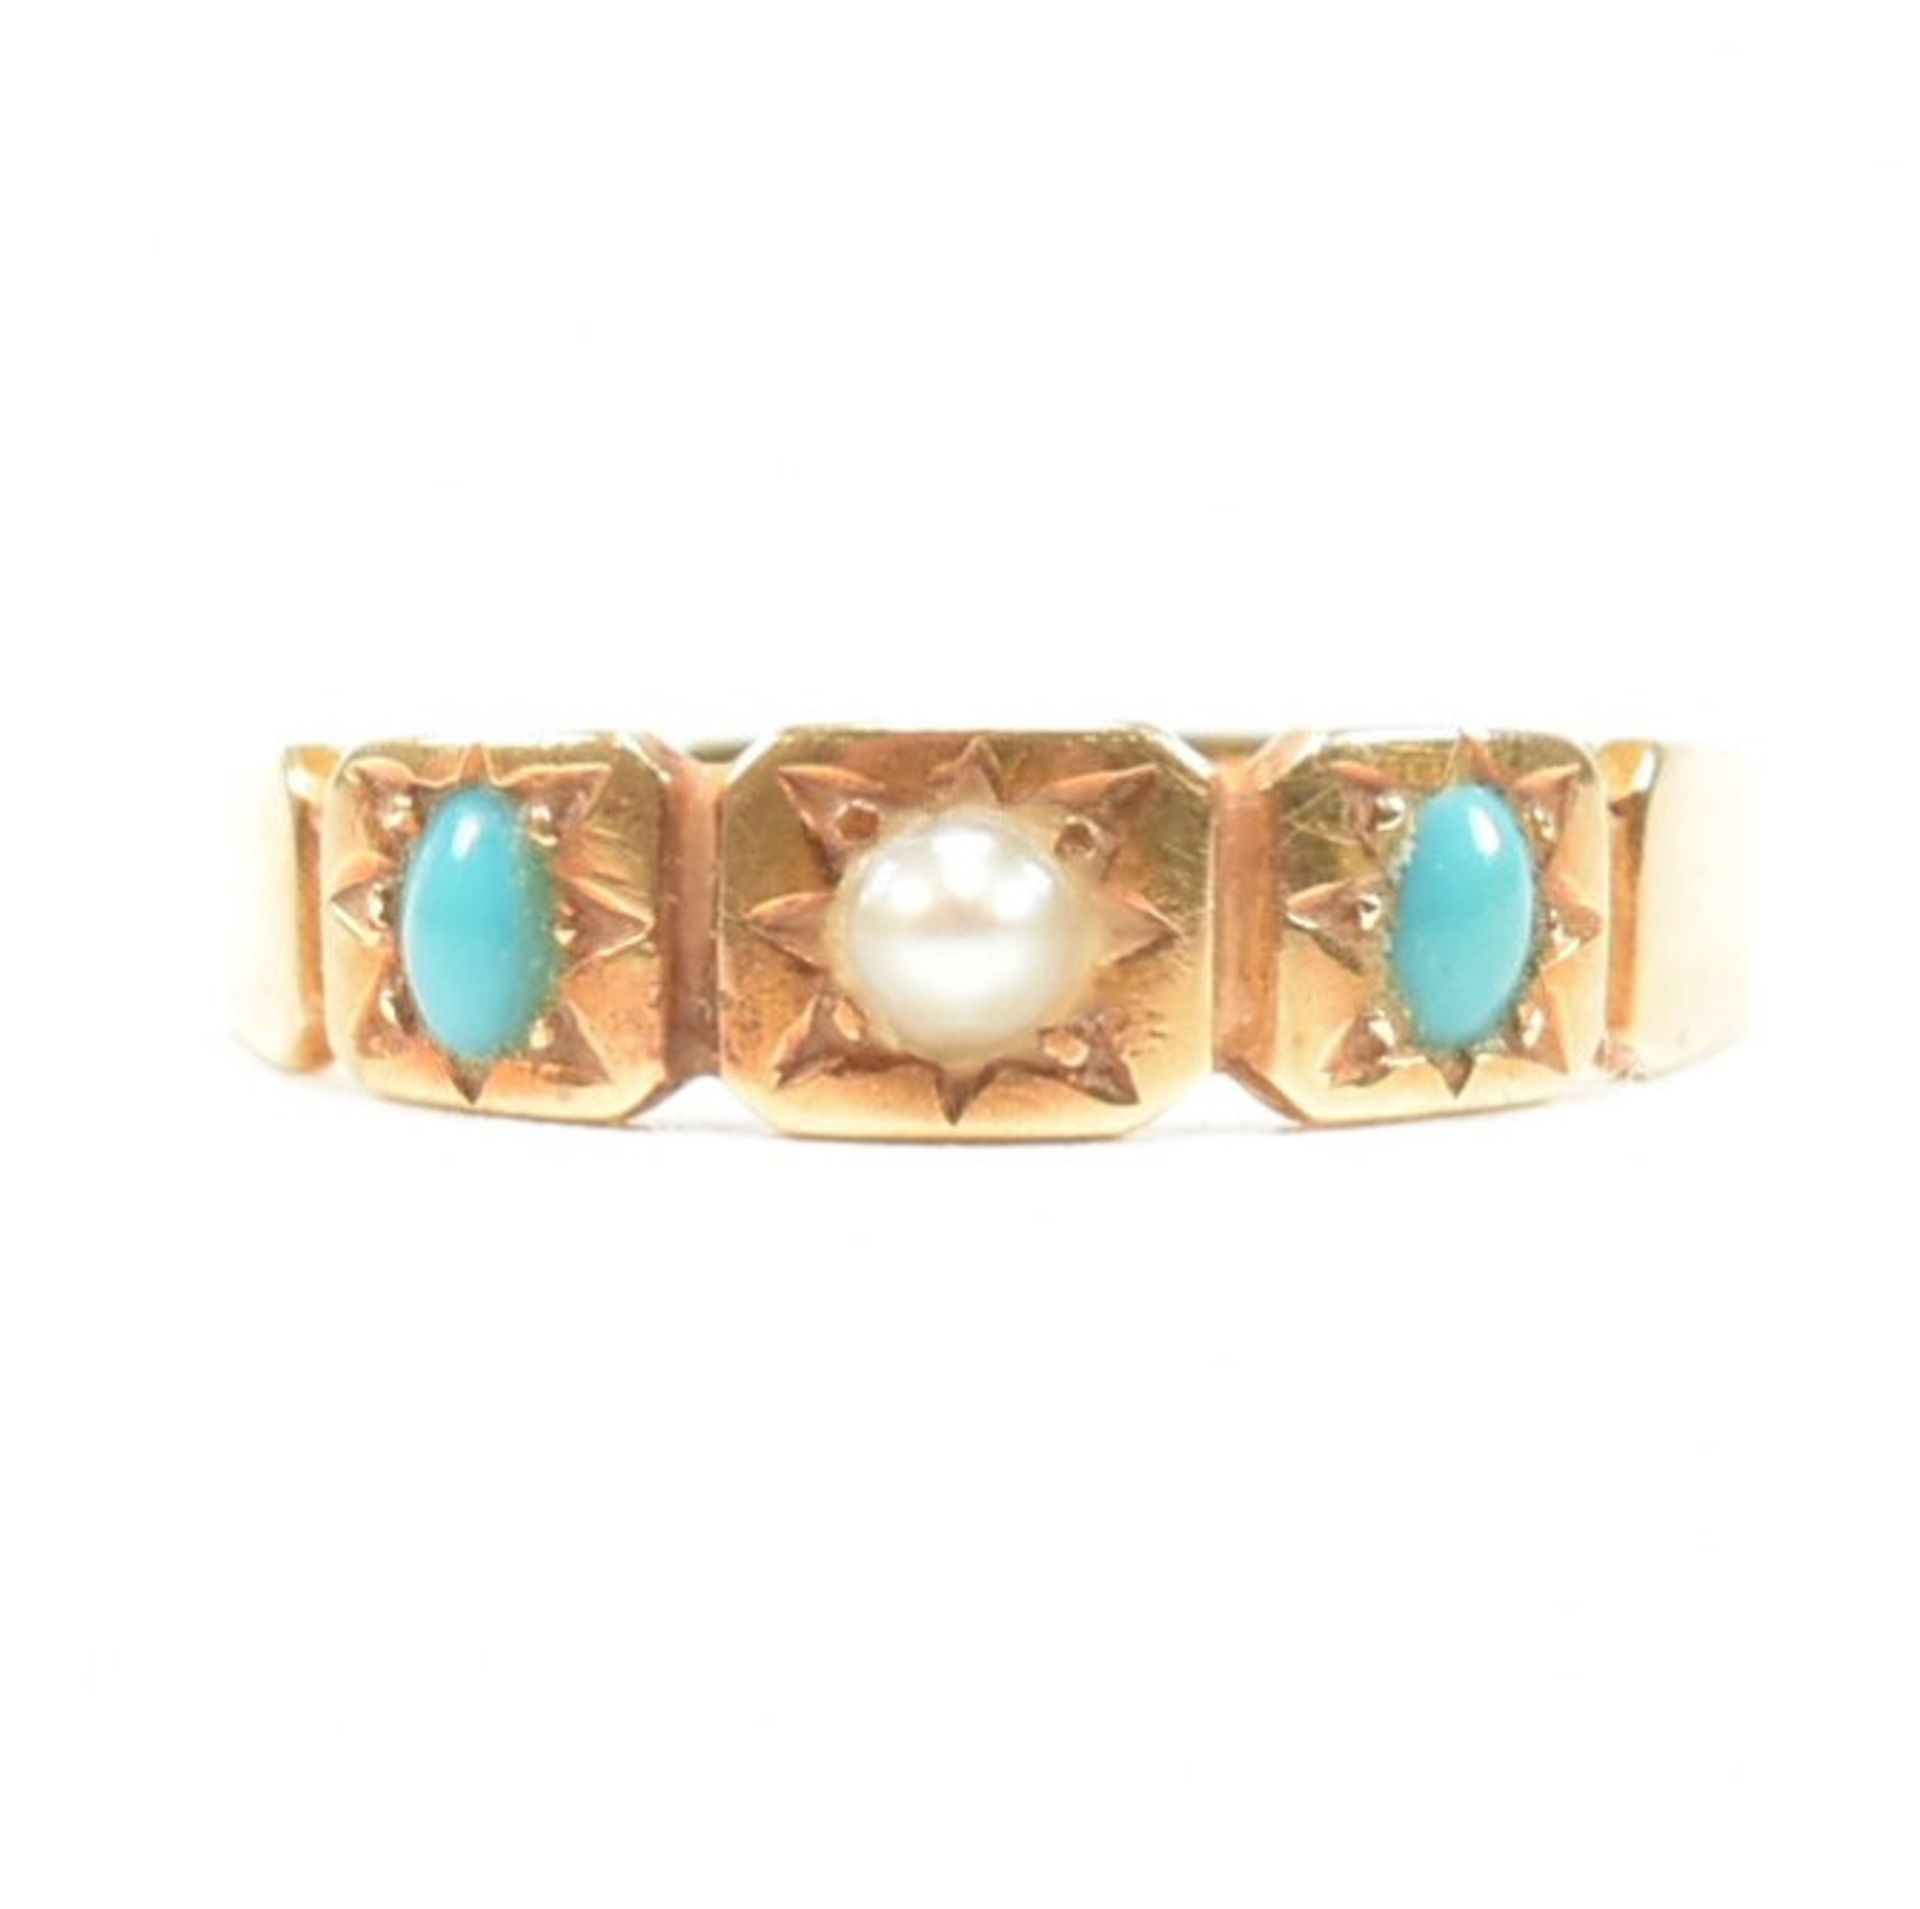 ANTIQUE 18CT GOLD TURQUOISE & PEARL RING